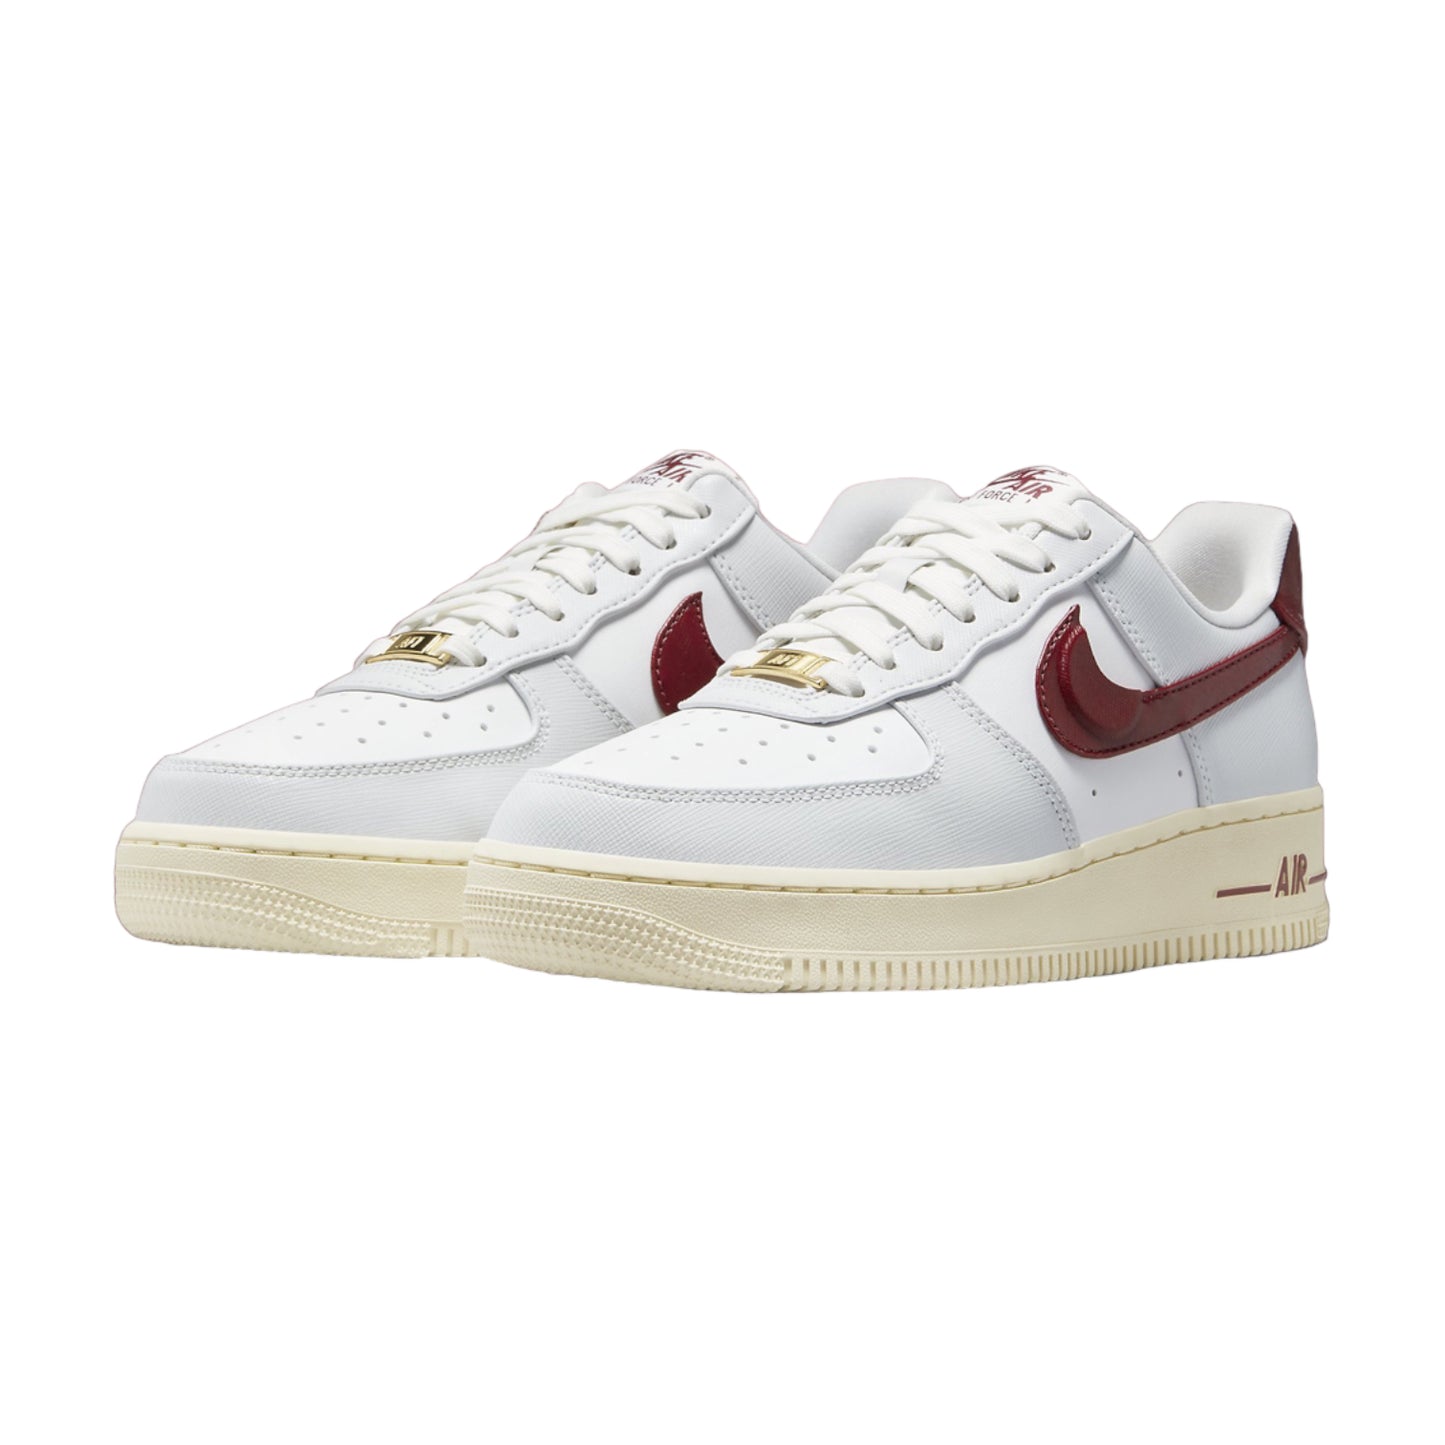 Nike Air Force 1 Low '07 SE 'Just Do It Photon Dust Team Red' (Women's)